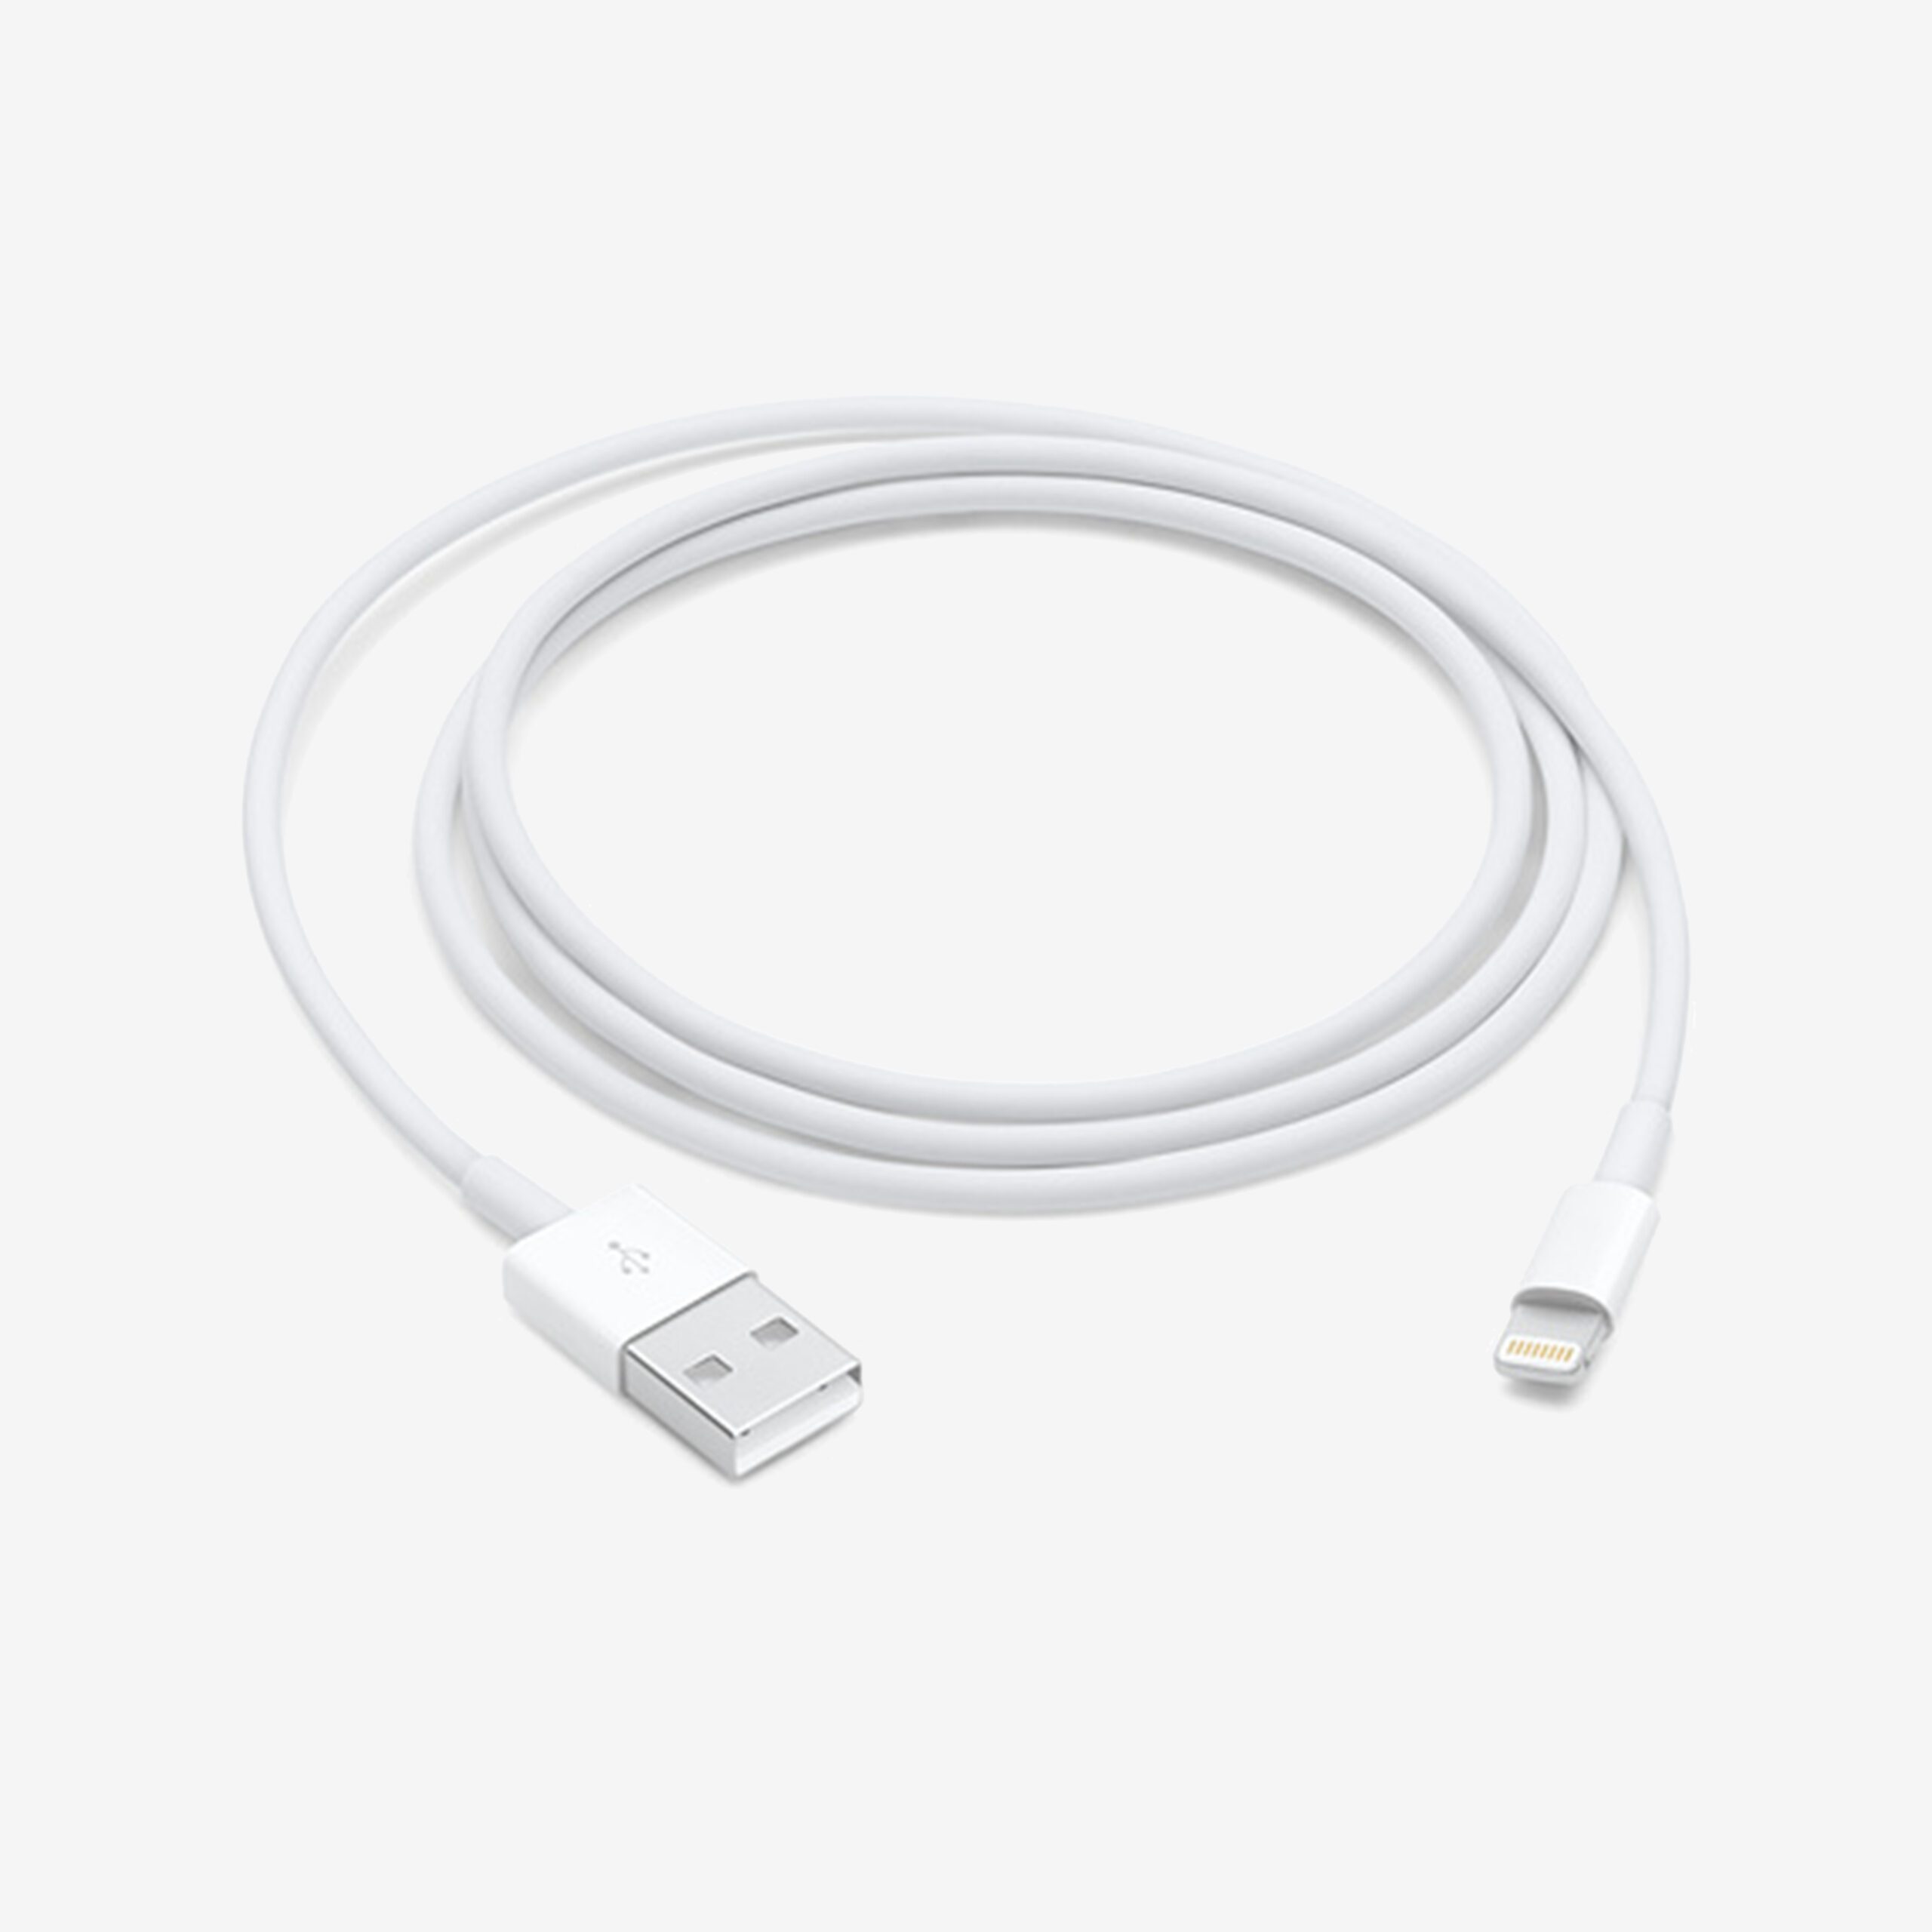 1 x USB-C Cable